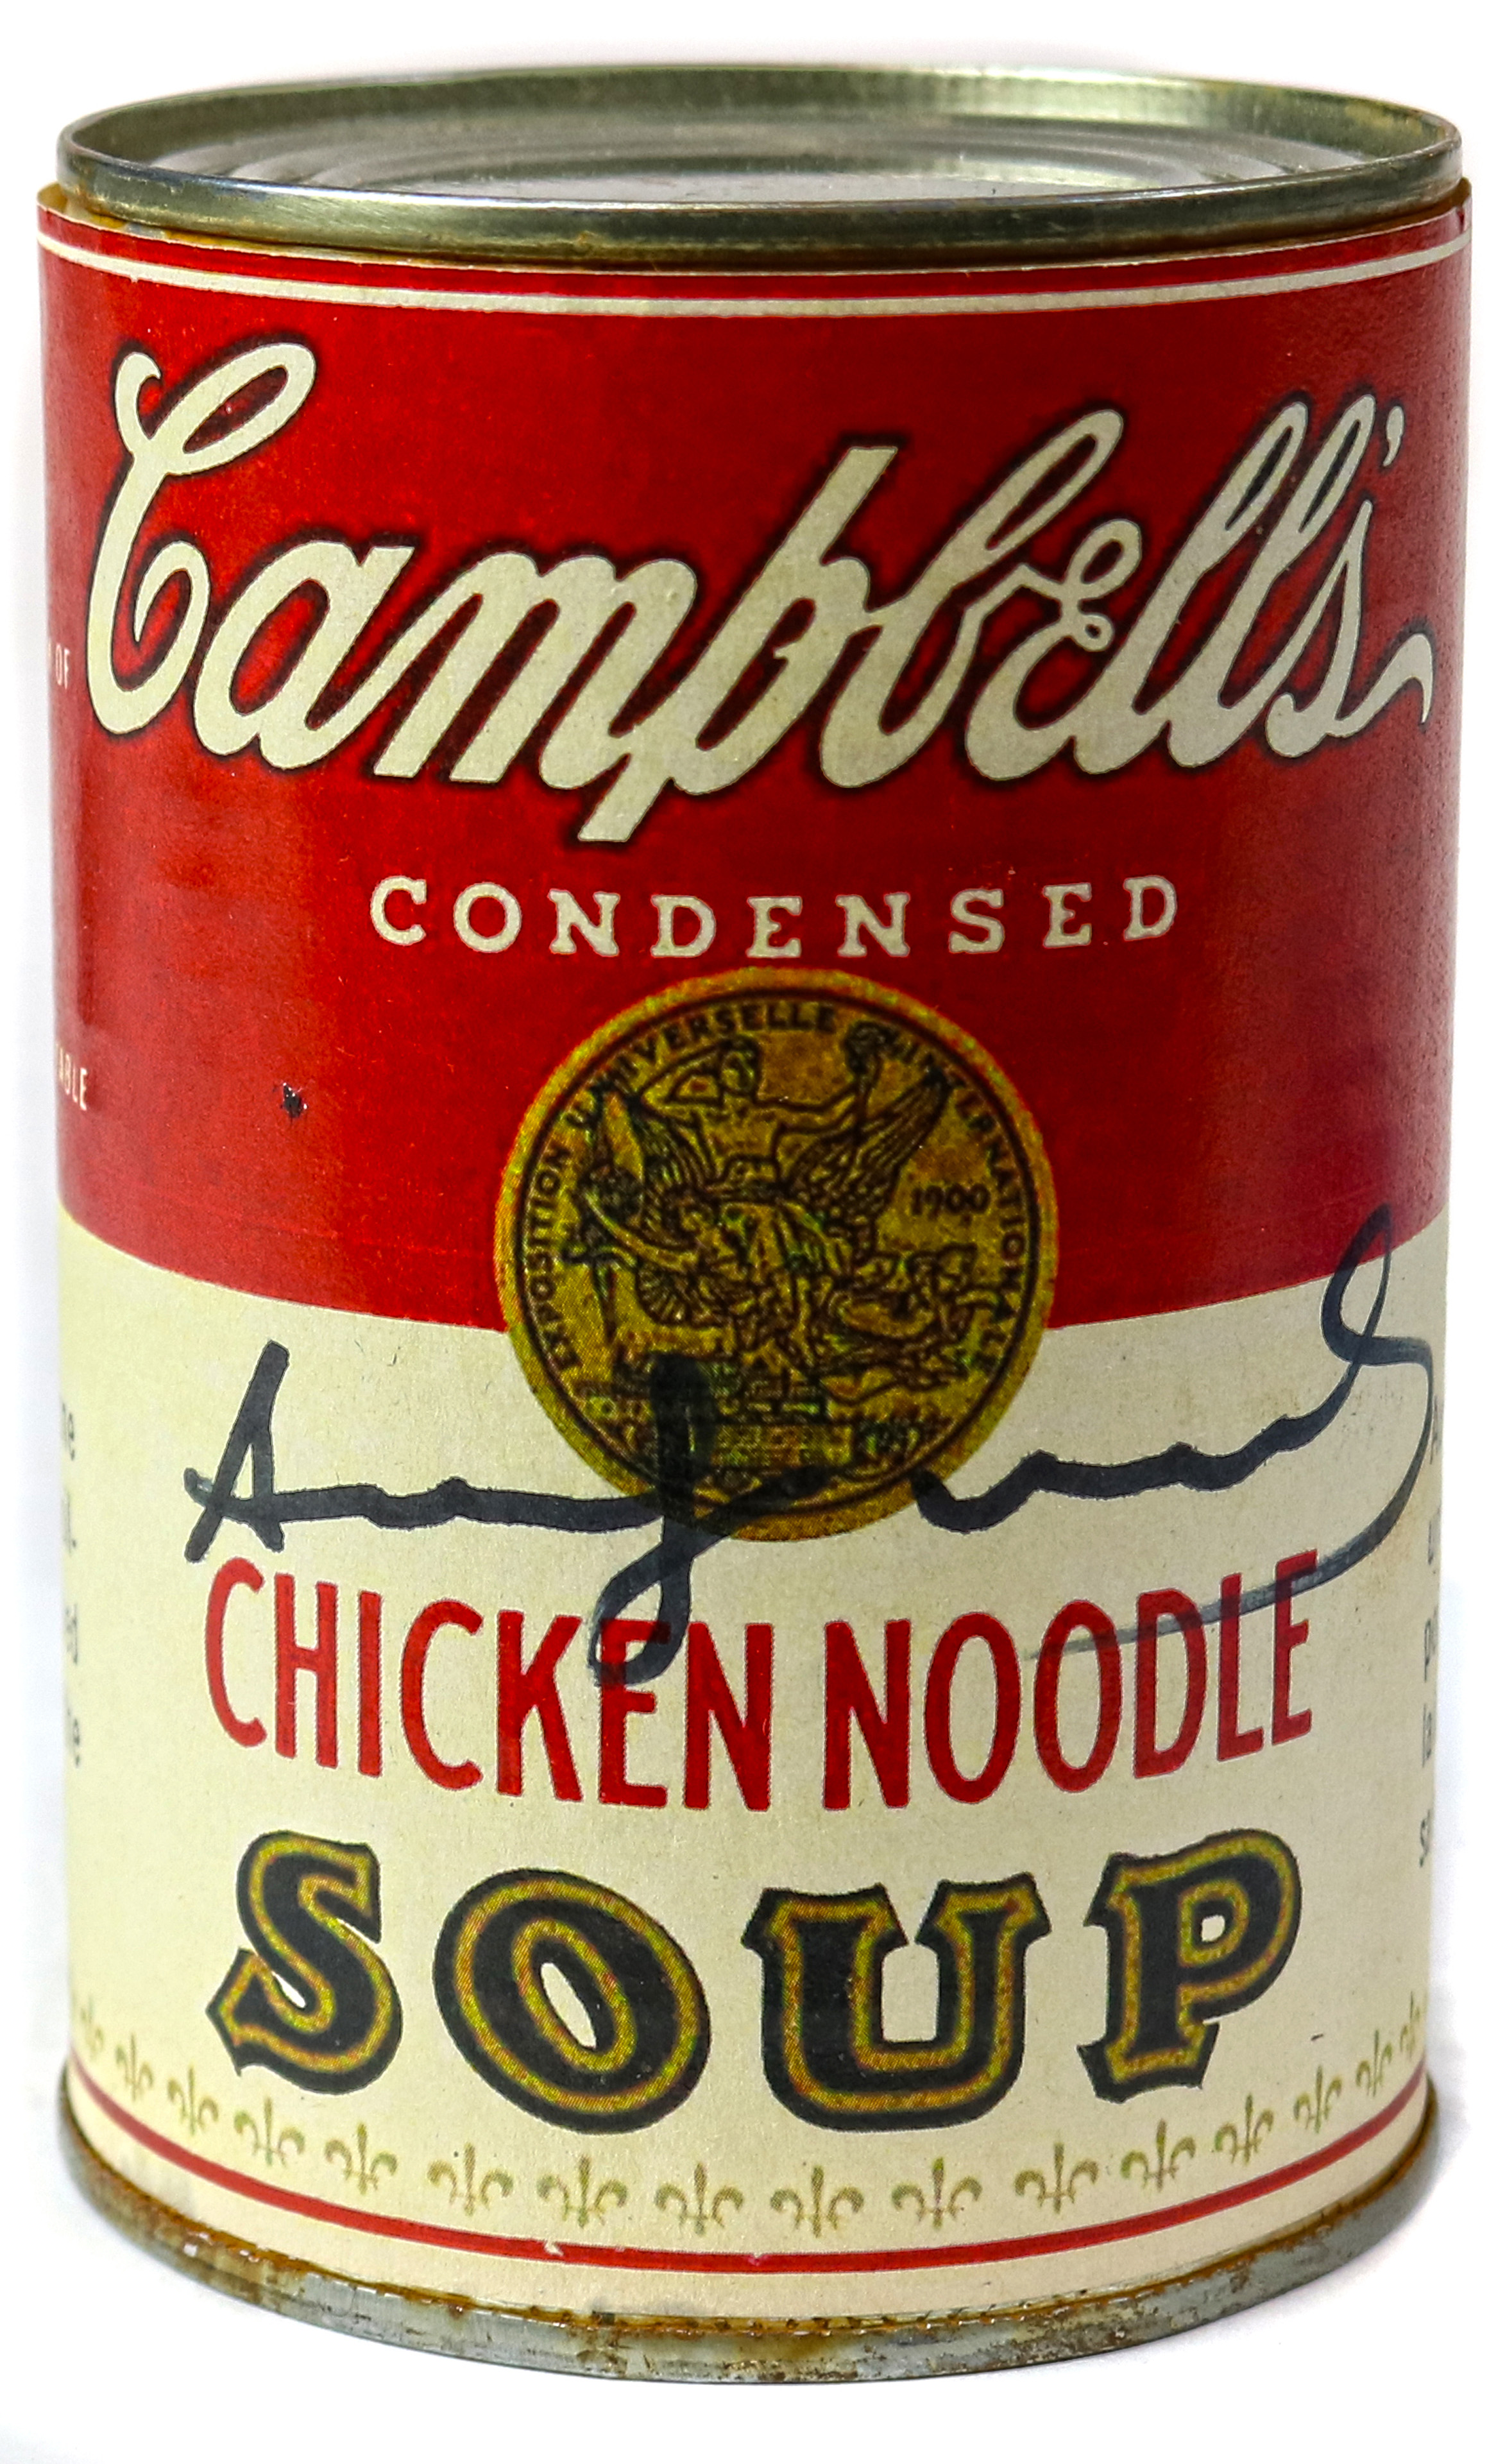 SOUP CAN, ATTRIBUTED TO ANDY WARHOL